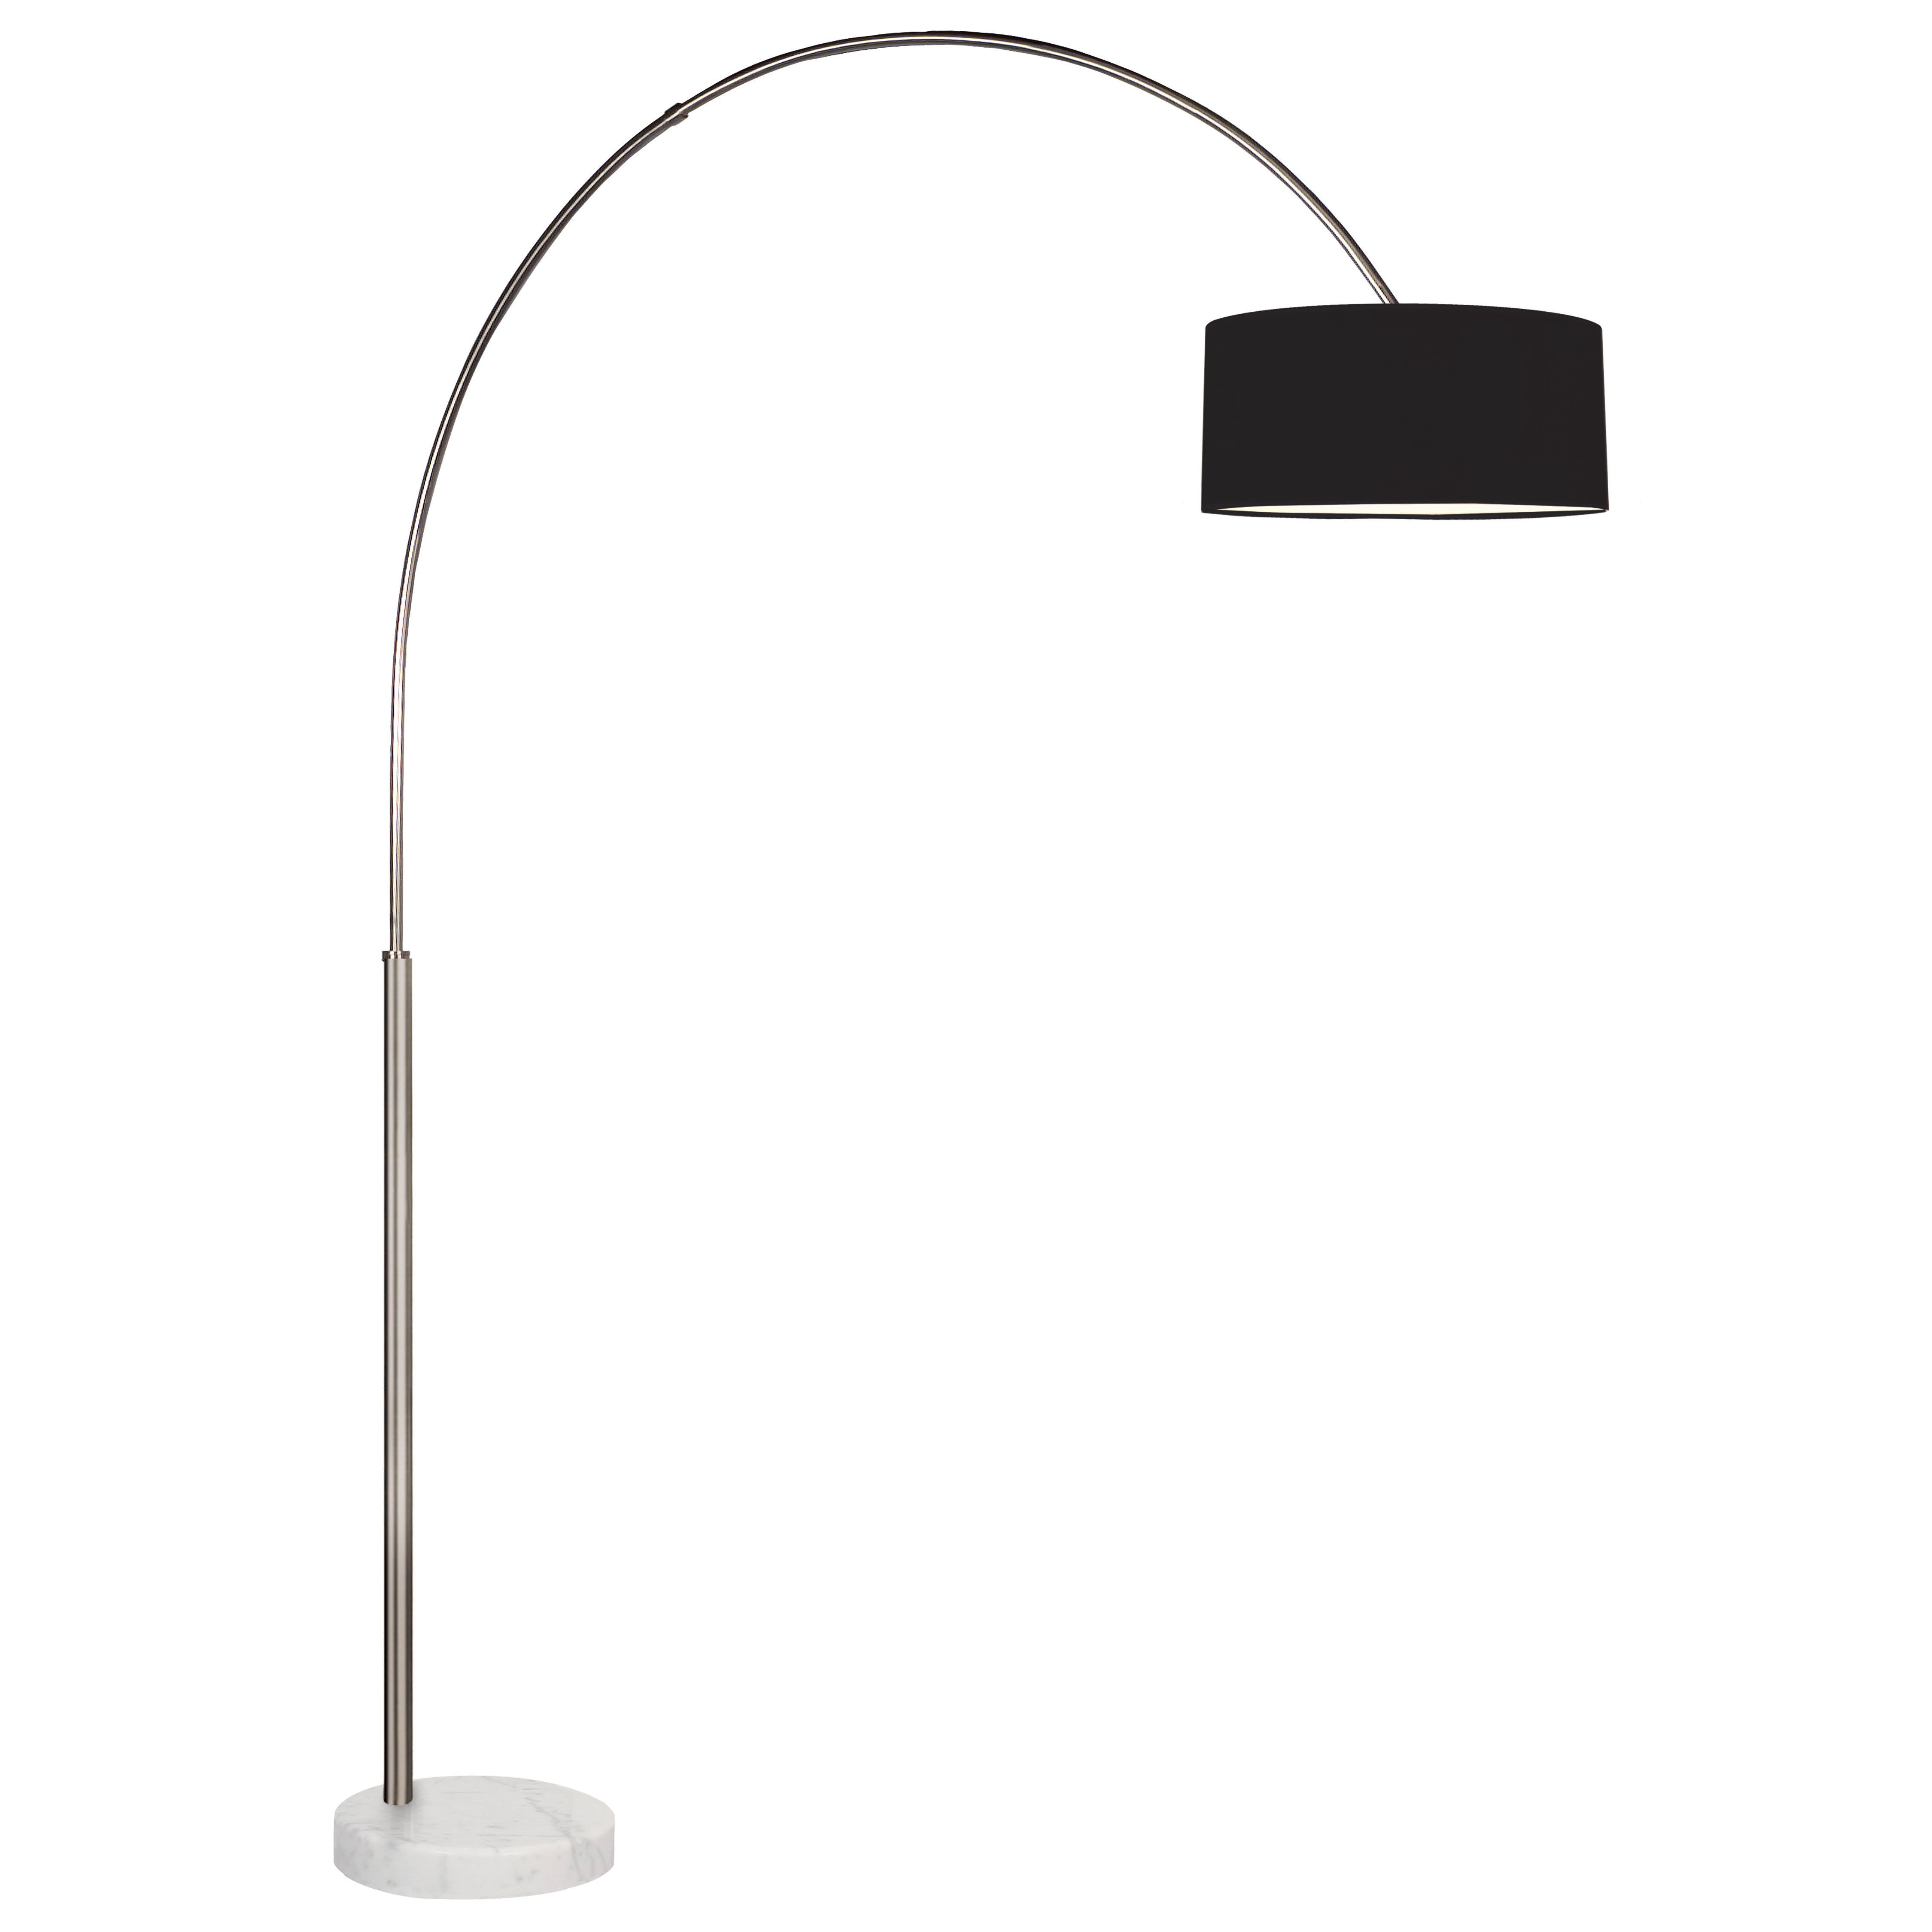 Arc Shade 785 Arched Floor Lamp Lighting Arc Floor within sizing 4500 X 4500